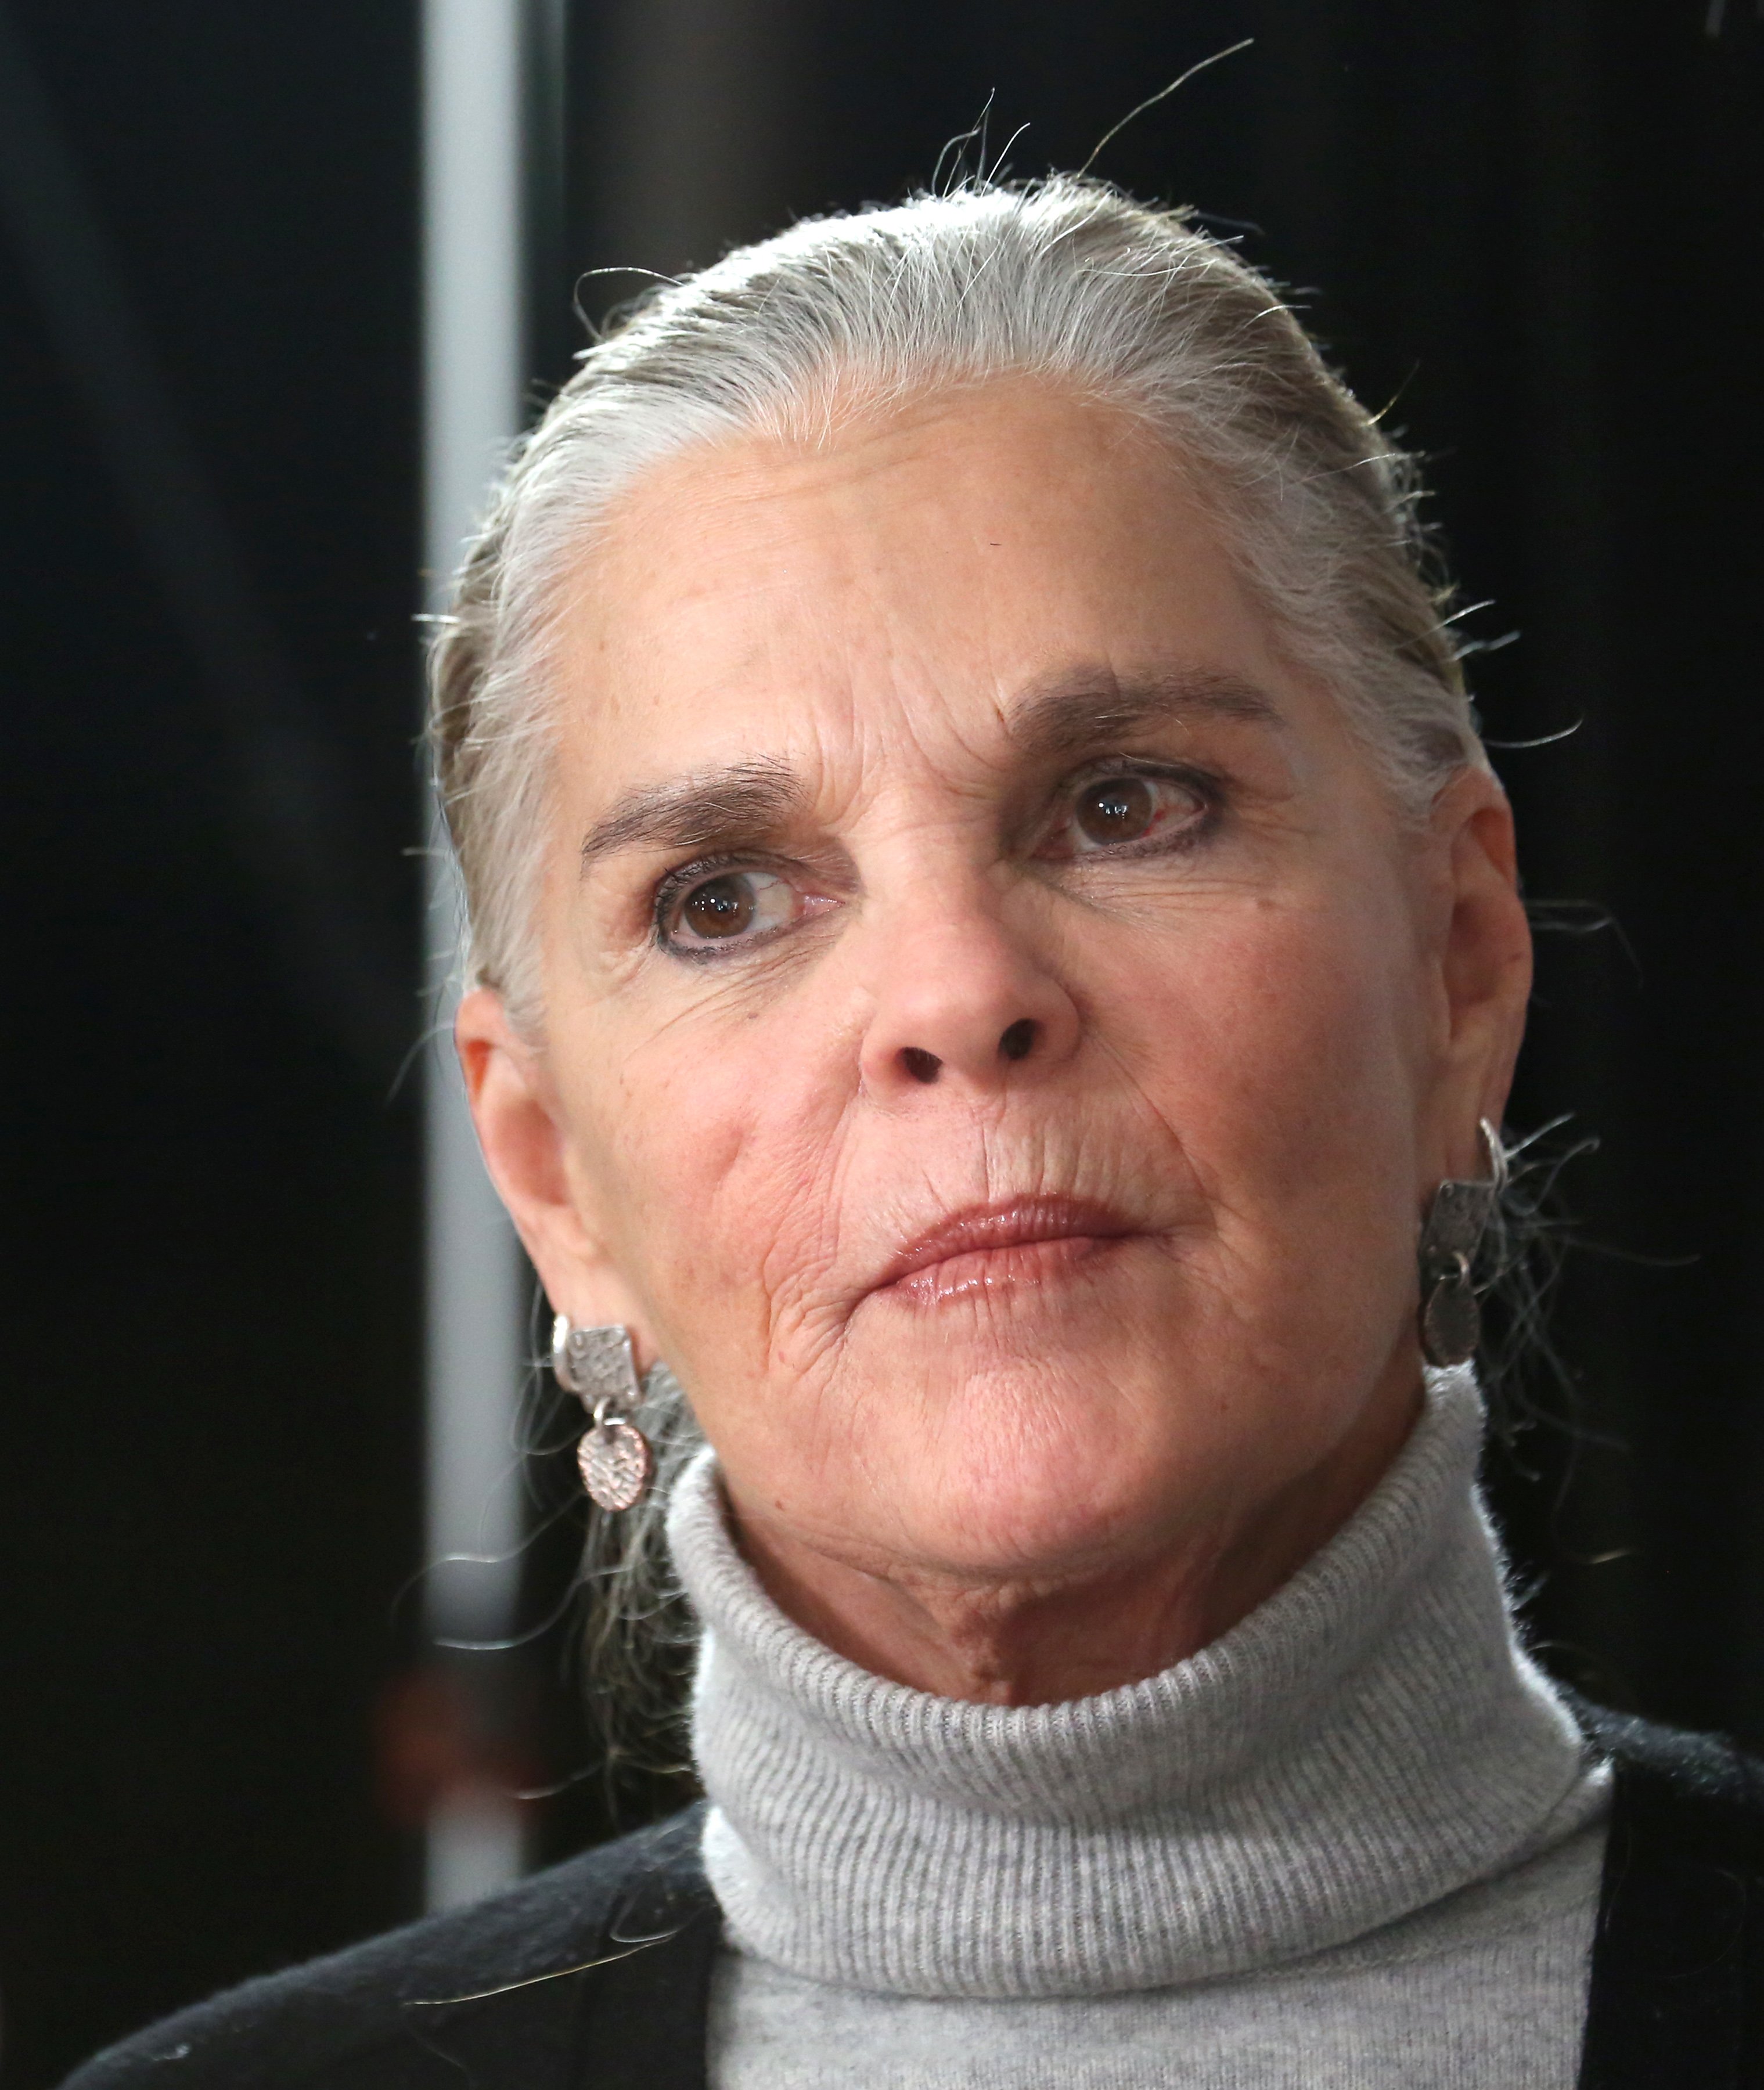 Ali MacGraw attending a photo call for touring production of "Love Letters" at The Shelter Studios Penthouse on February 24, 2015 in New York City. / Source: Getty Images